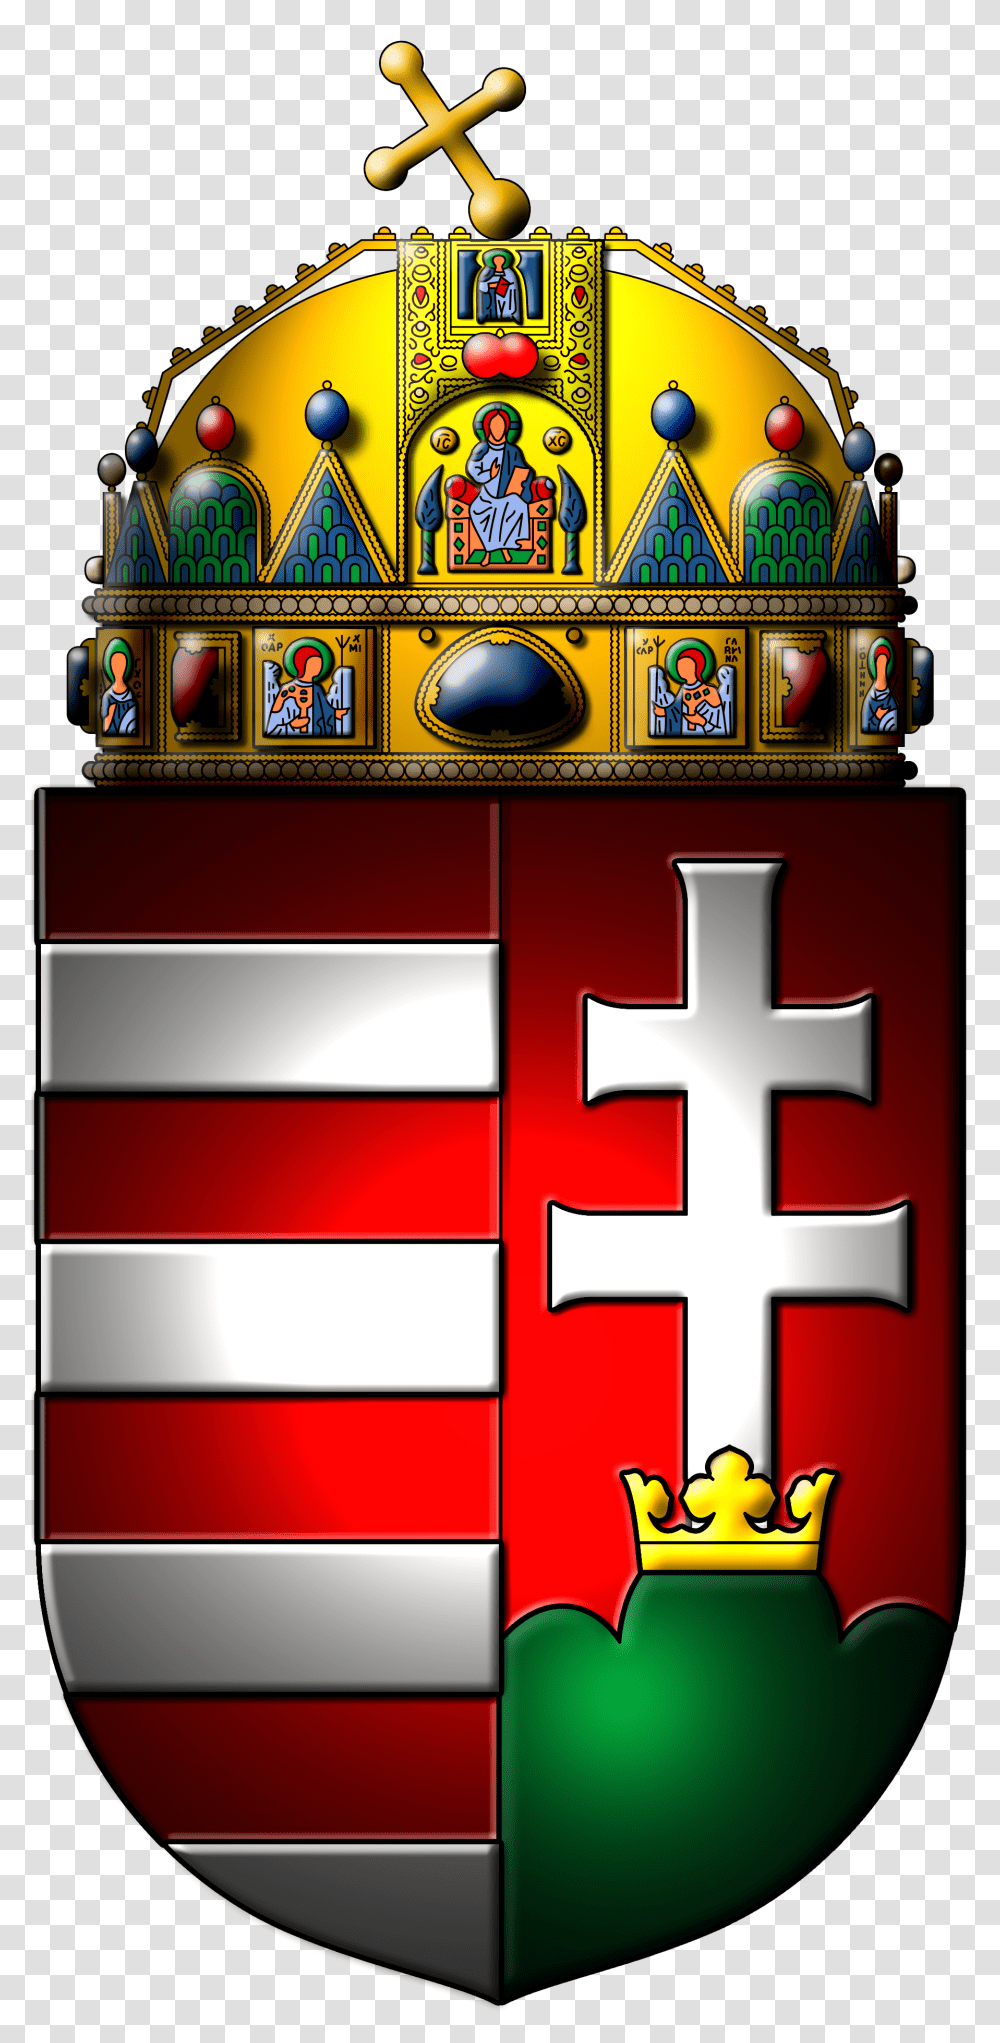 Coat Of Arms Of Hungary Hungarian Coat Of Arms, Fire Truck, Vehicle, Transportation, Super Mario Transparent Png